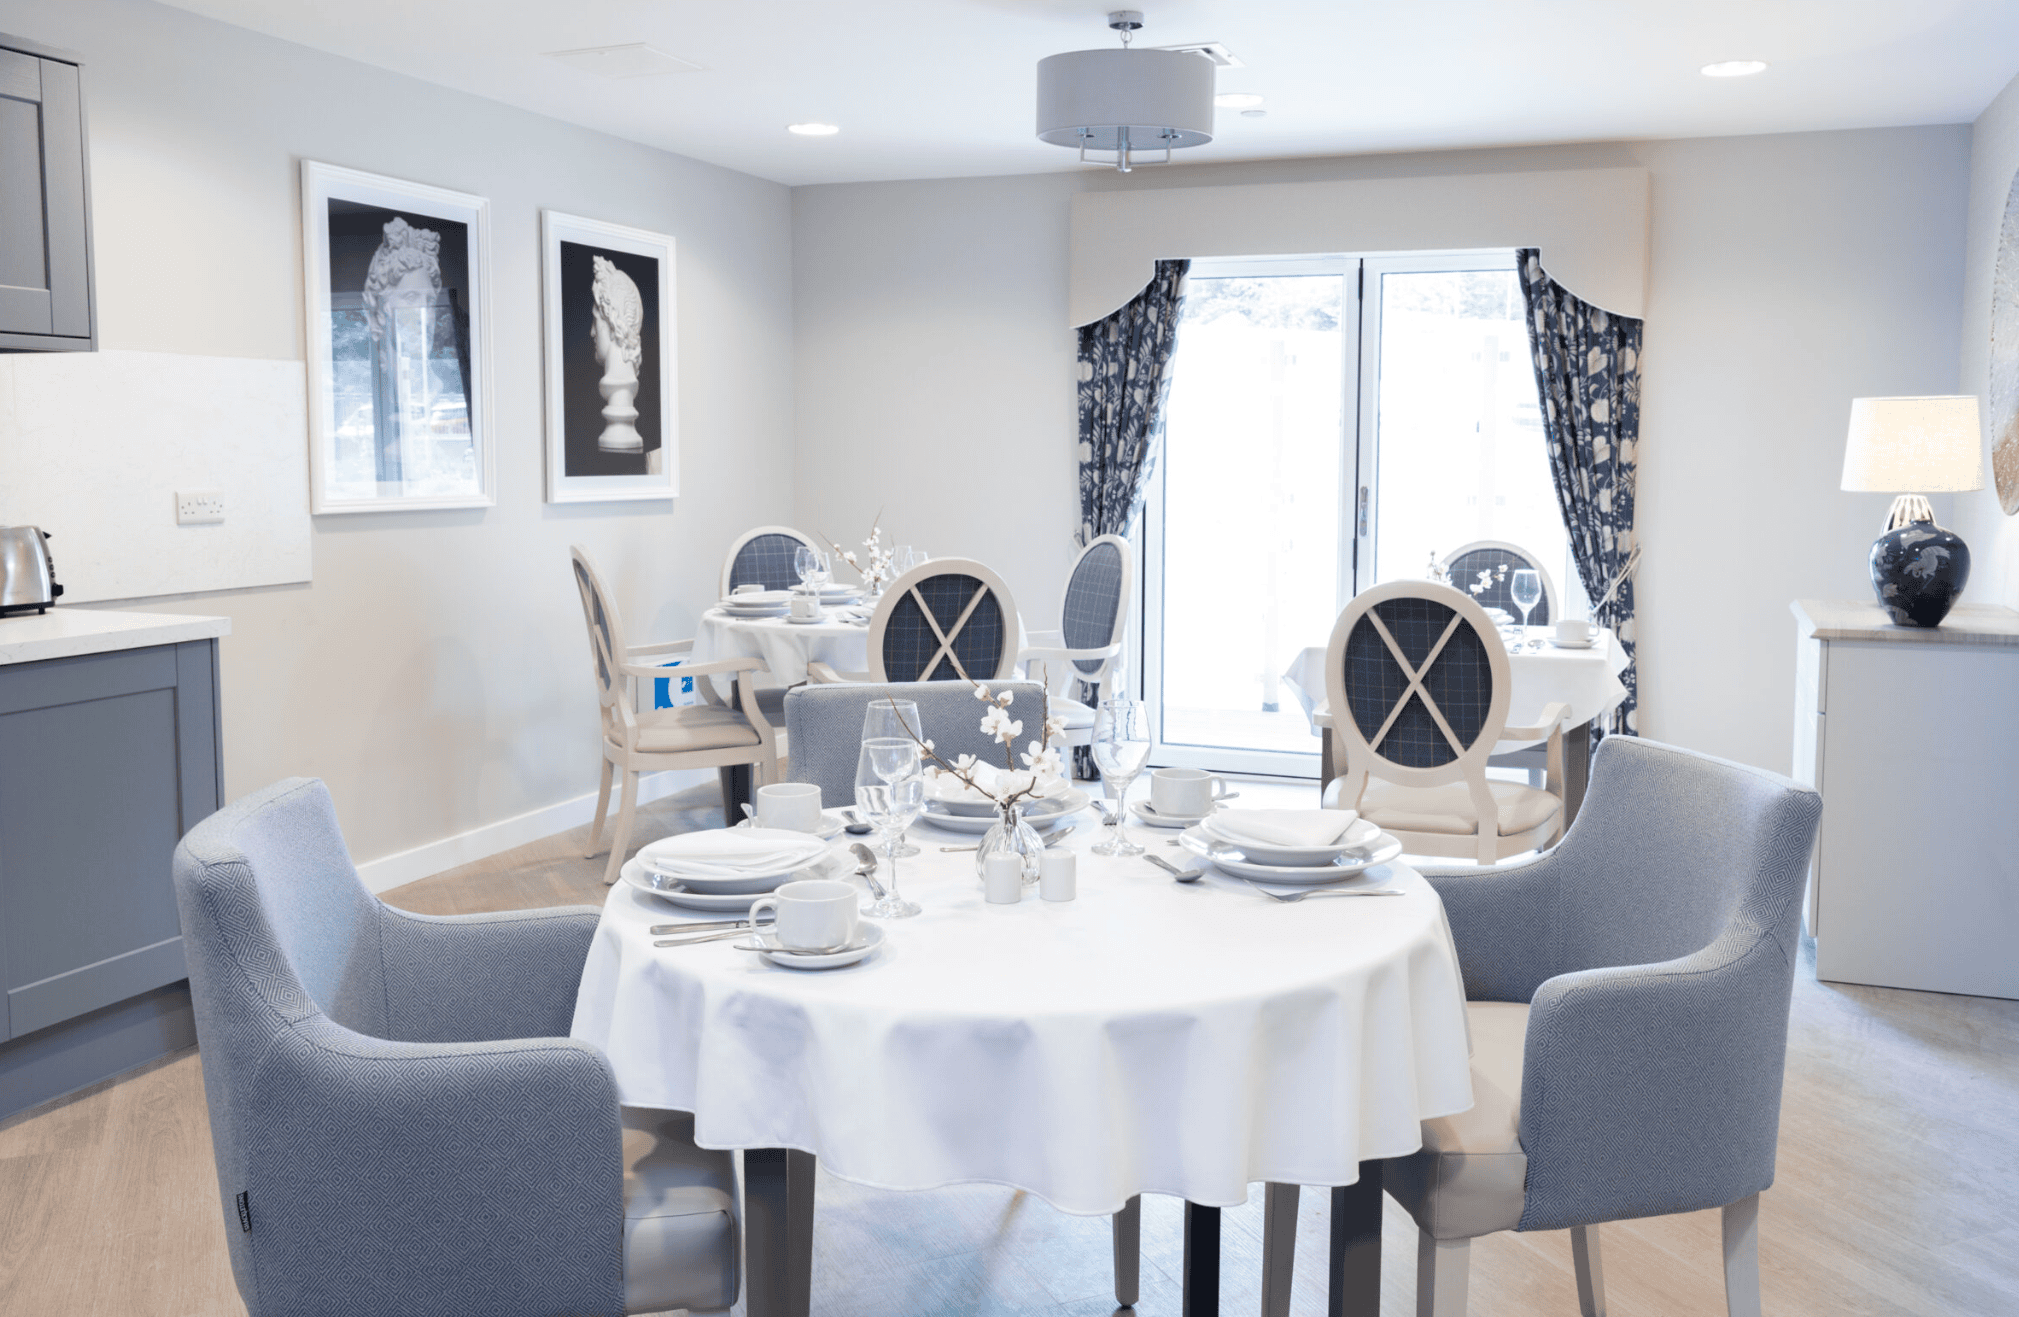 Dining room of Mearns View care home in Glasgow, Scotland